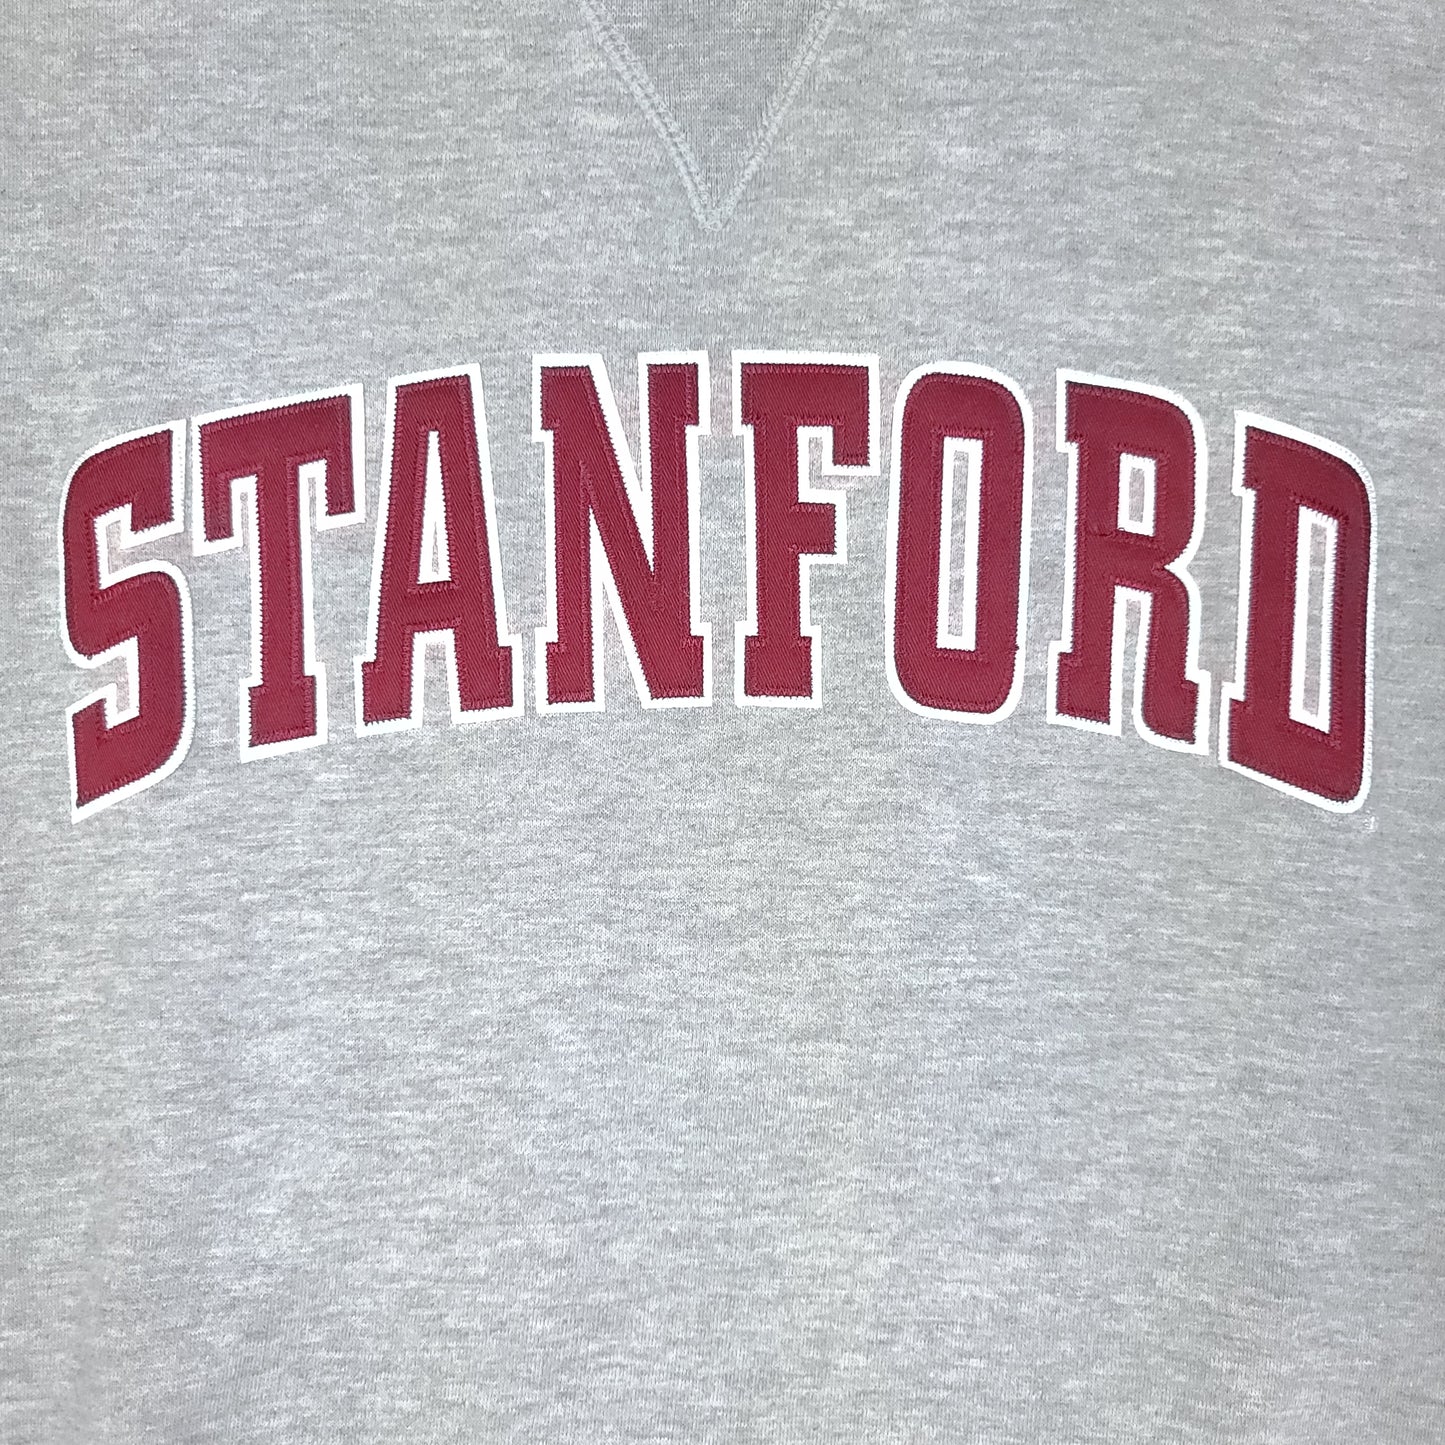 Stanford University Gray Sweatshirt (New with Tags)